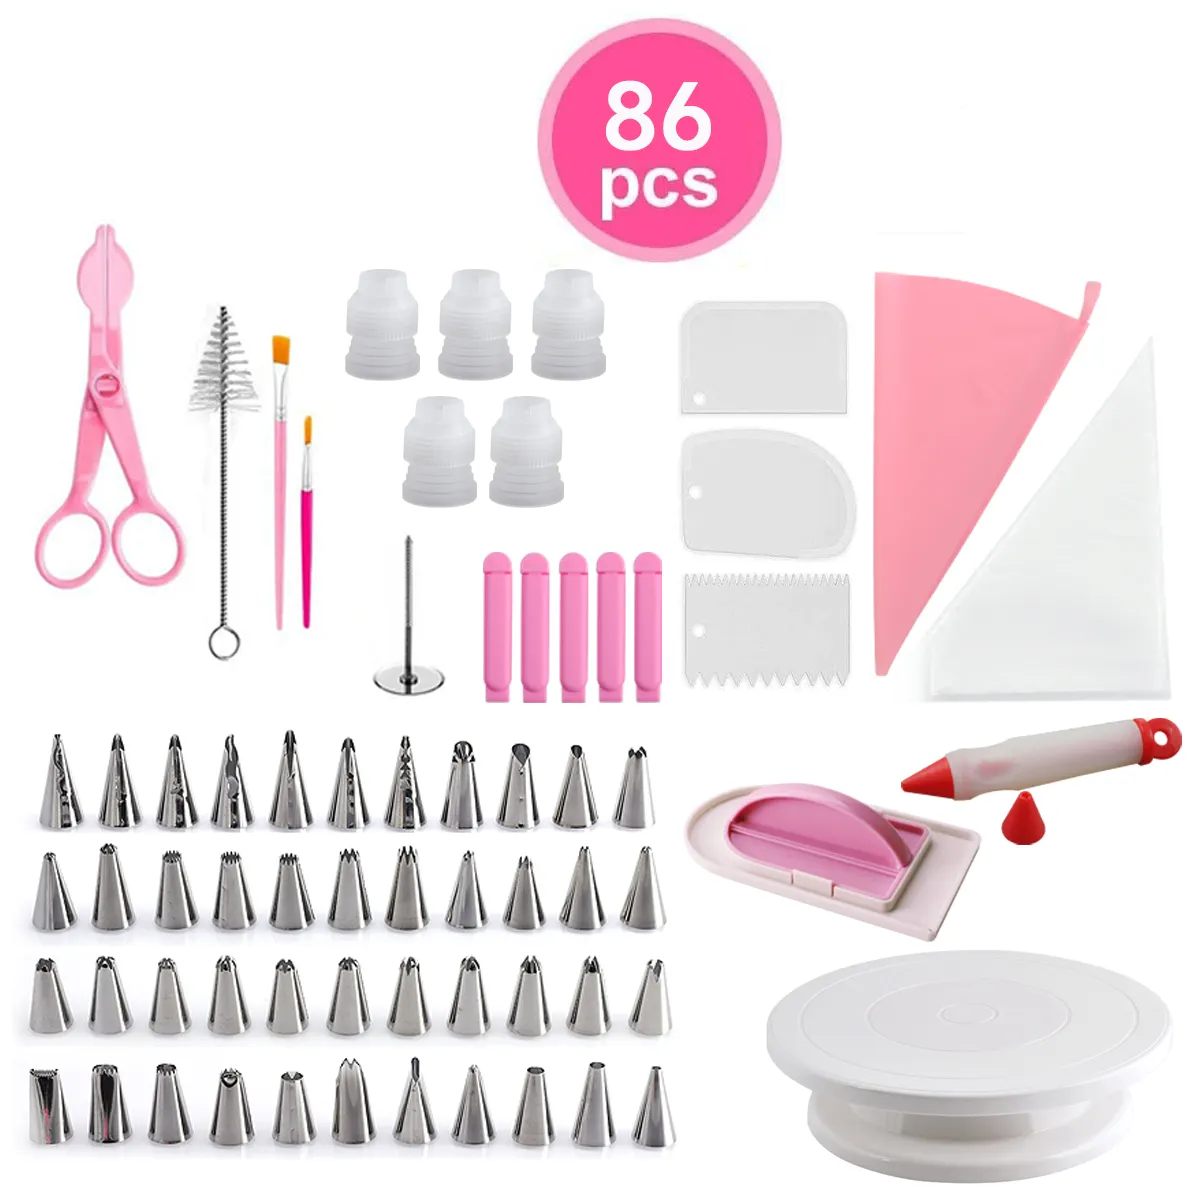 86/85/83/1pcs Cake Decorating Supplies Kit Set Piping Tips Nozzles Baking Tool Turntable Stand Equipment